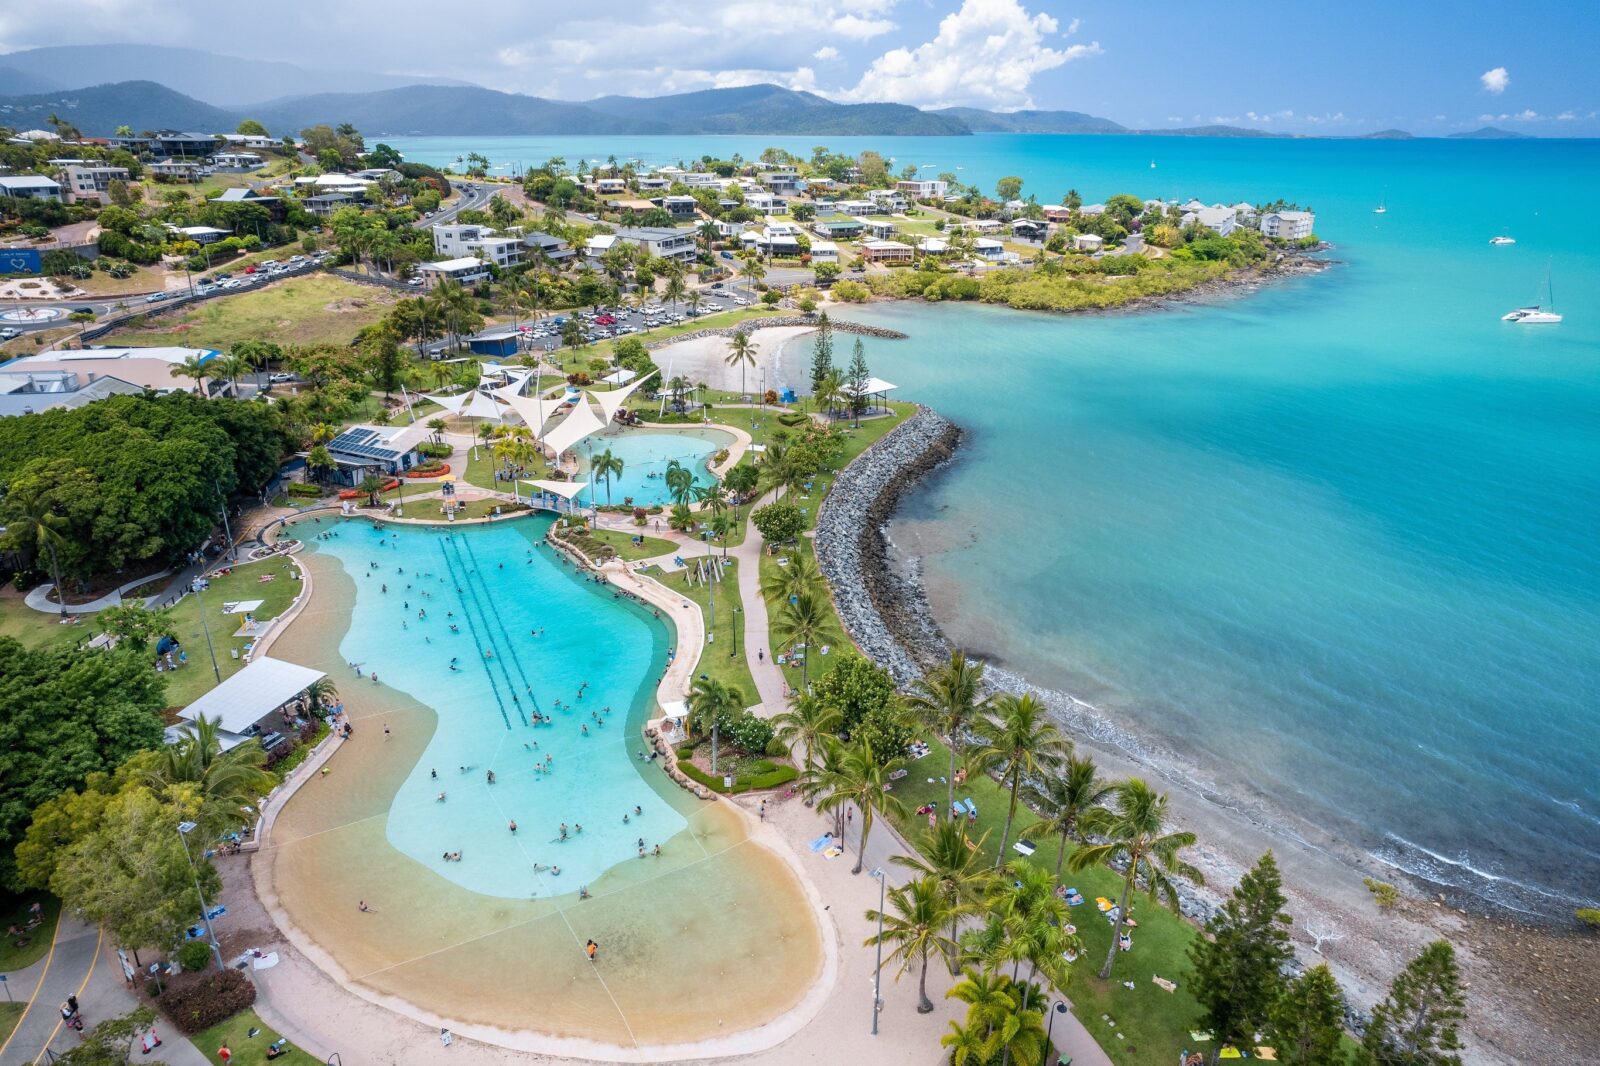 Aerial photo of Airlie Beach Lagoon with houses, beach and blue ocean surrounding